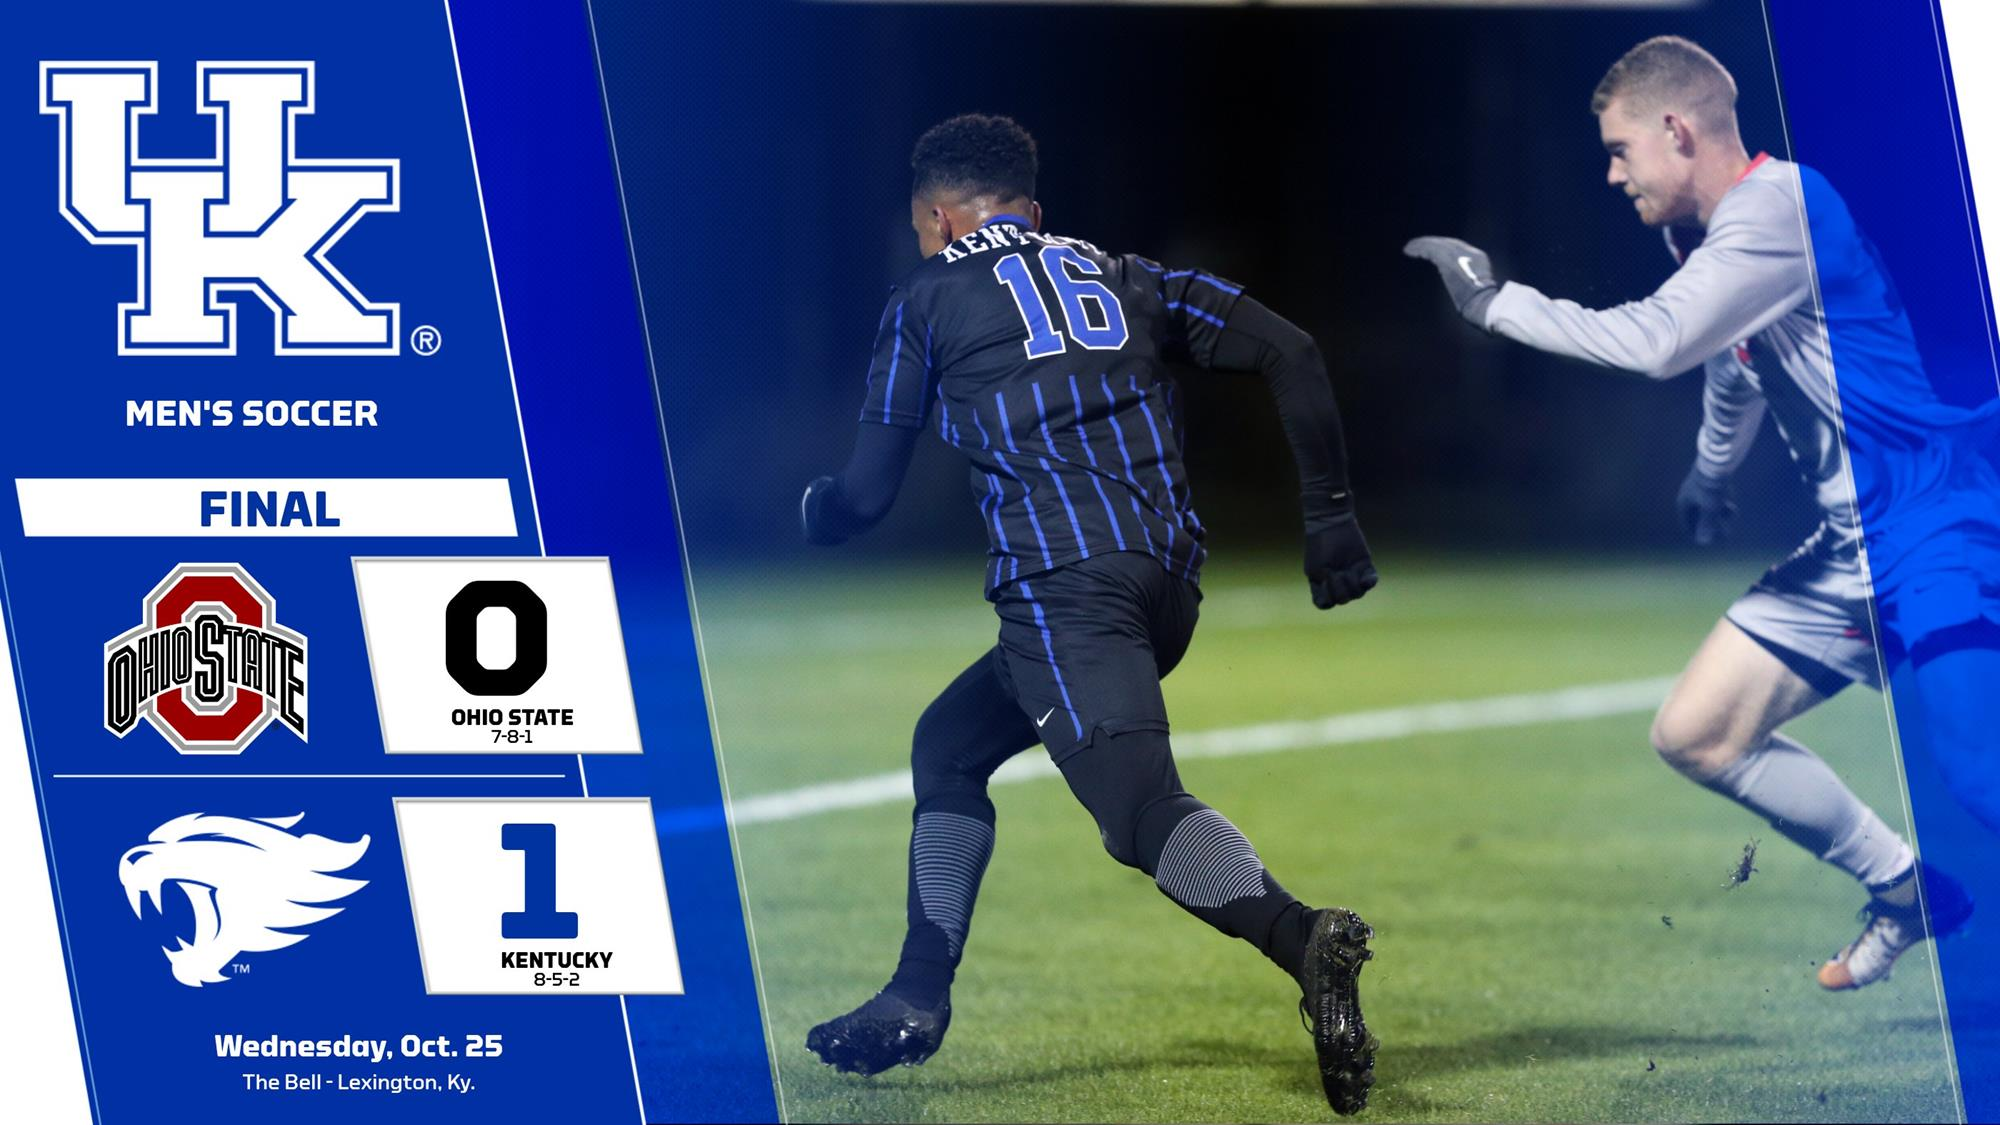 Hutchins’ Late Winner Lifts Kentucky to 1-0 Win over Ohio State